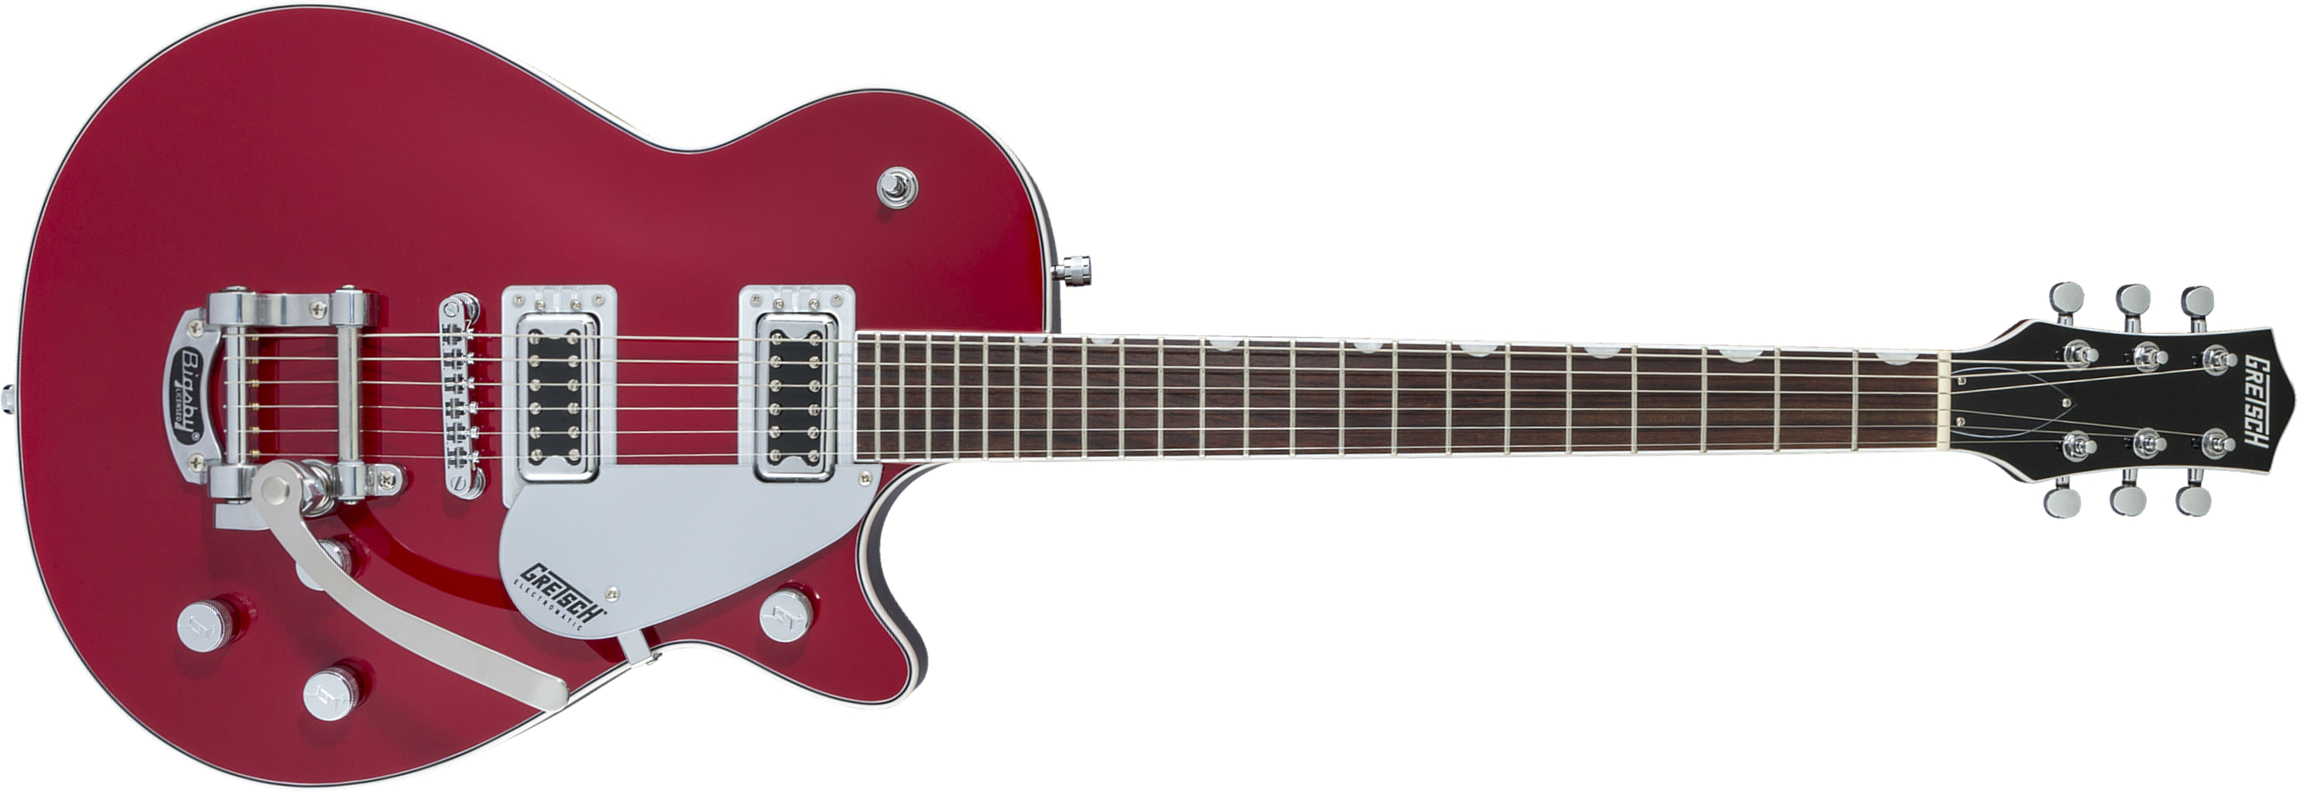 Gretsch G5230t Electromatic Jet Ft Single-cut Bigsby Hh Trem Wal - Firebird Red - Single cut electric guitar - Main picture